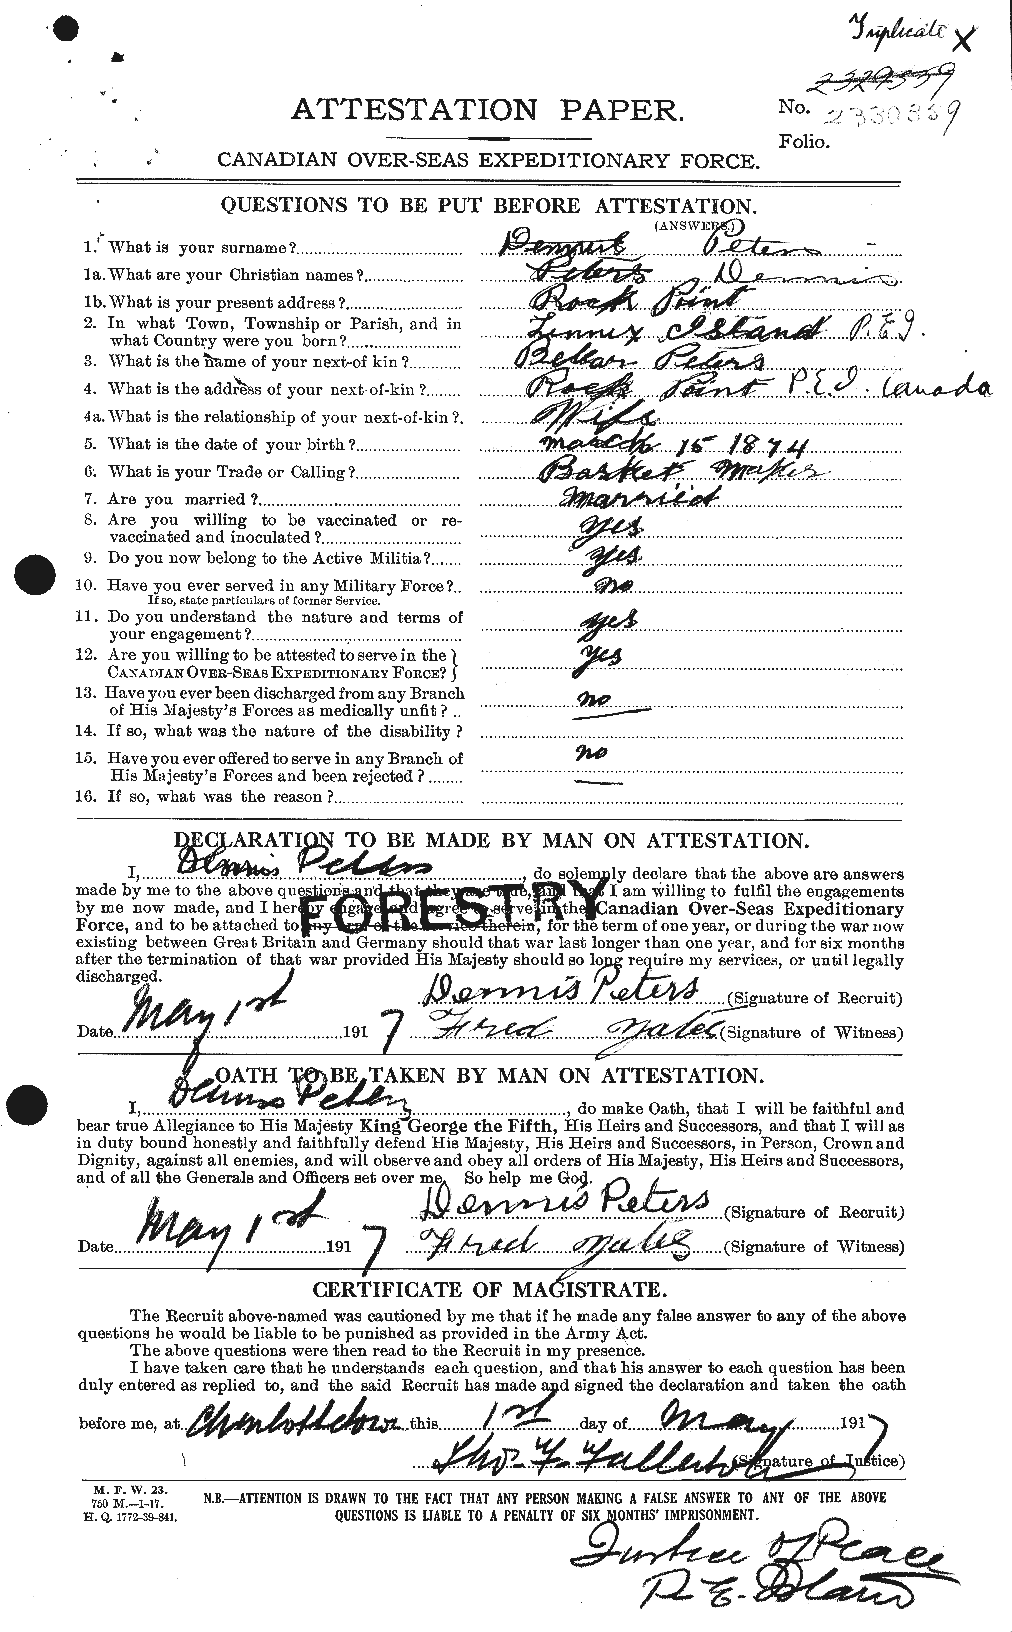 Personnel Records of the First World War - CEF 575393a